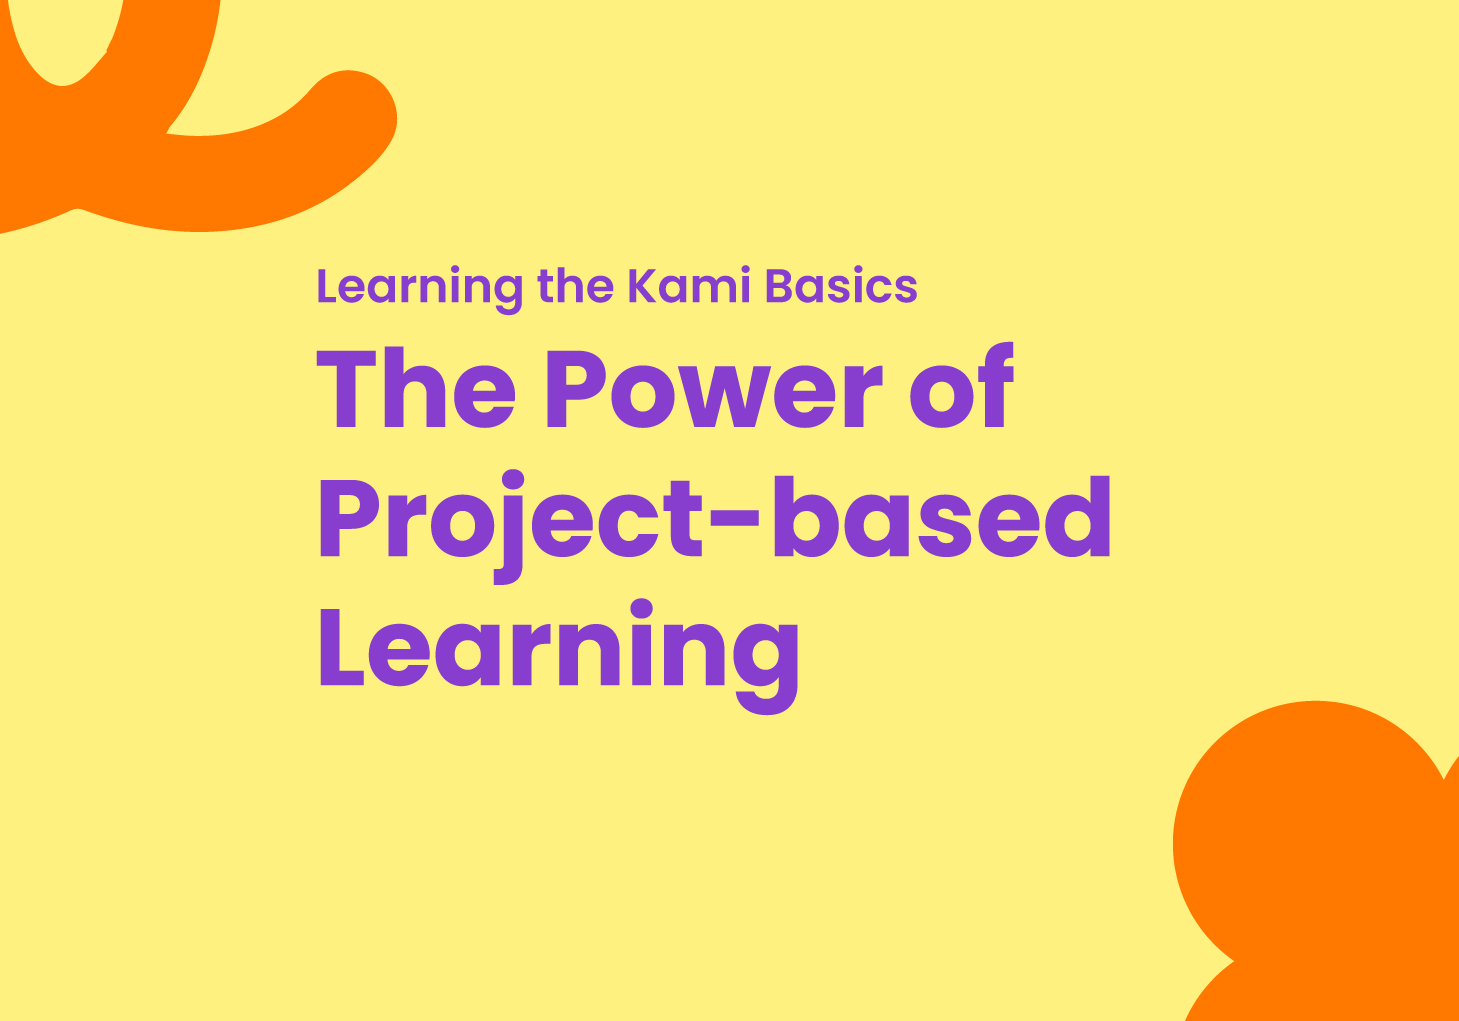 Learning the Kami Basics: The Power of Project-based Learning